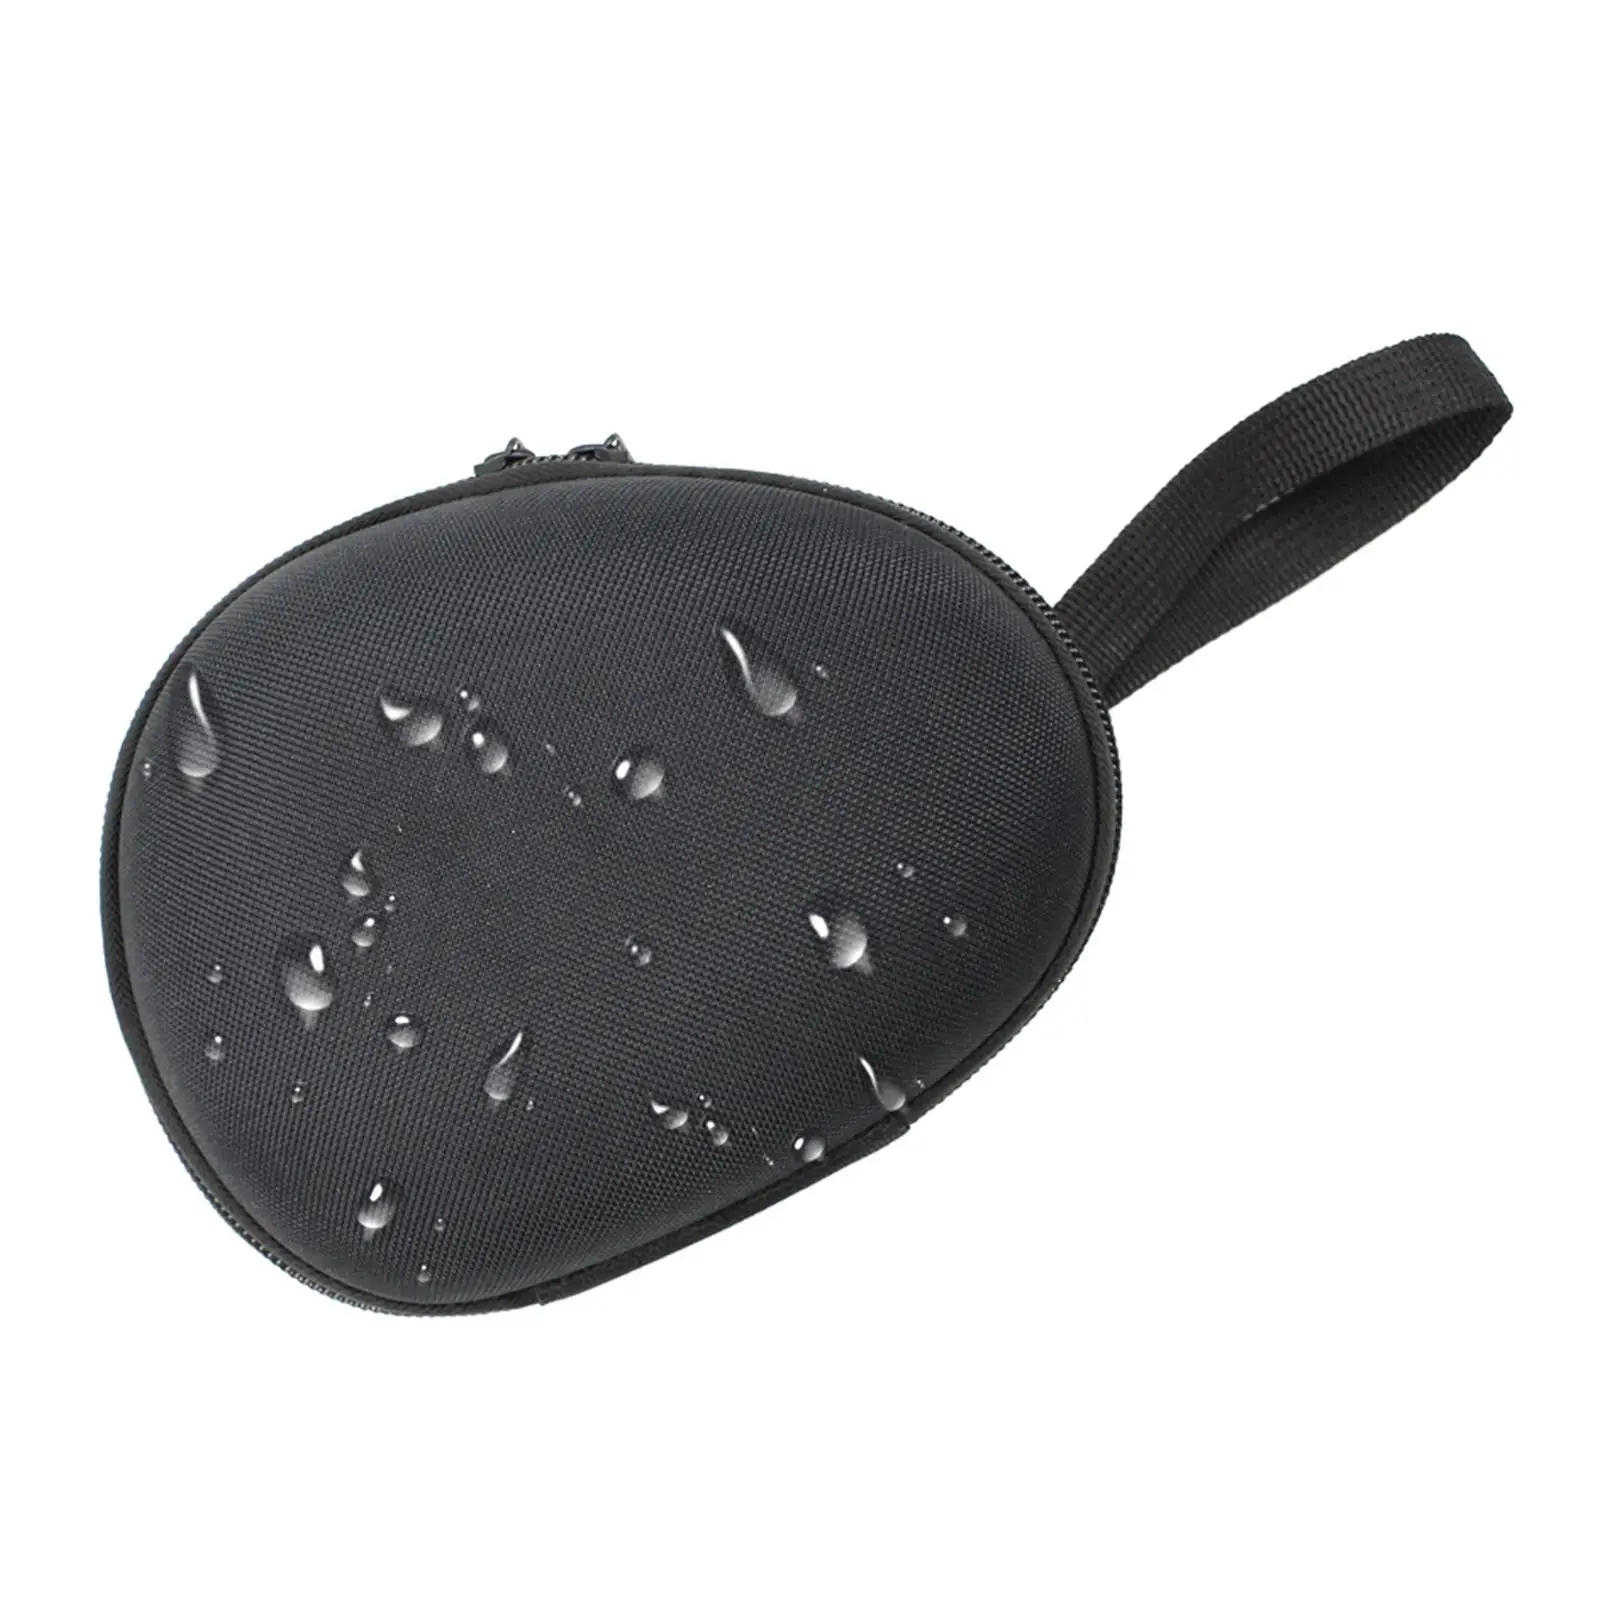 Fishing Reel Cover Waterproof for Bait Casting Fishing Accessories Drum